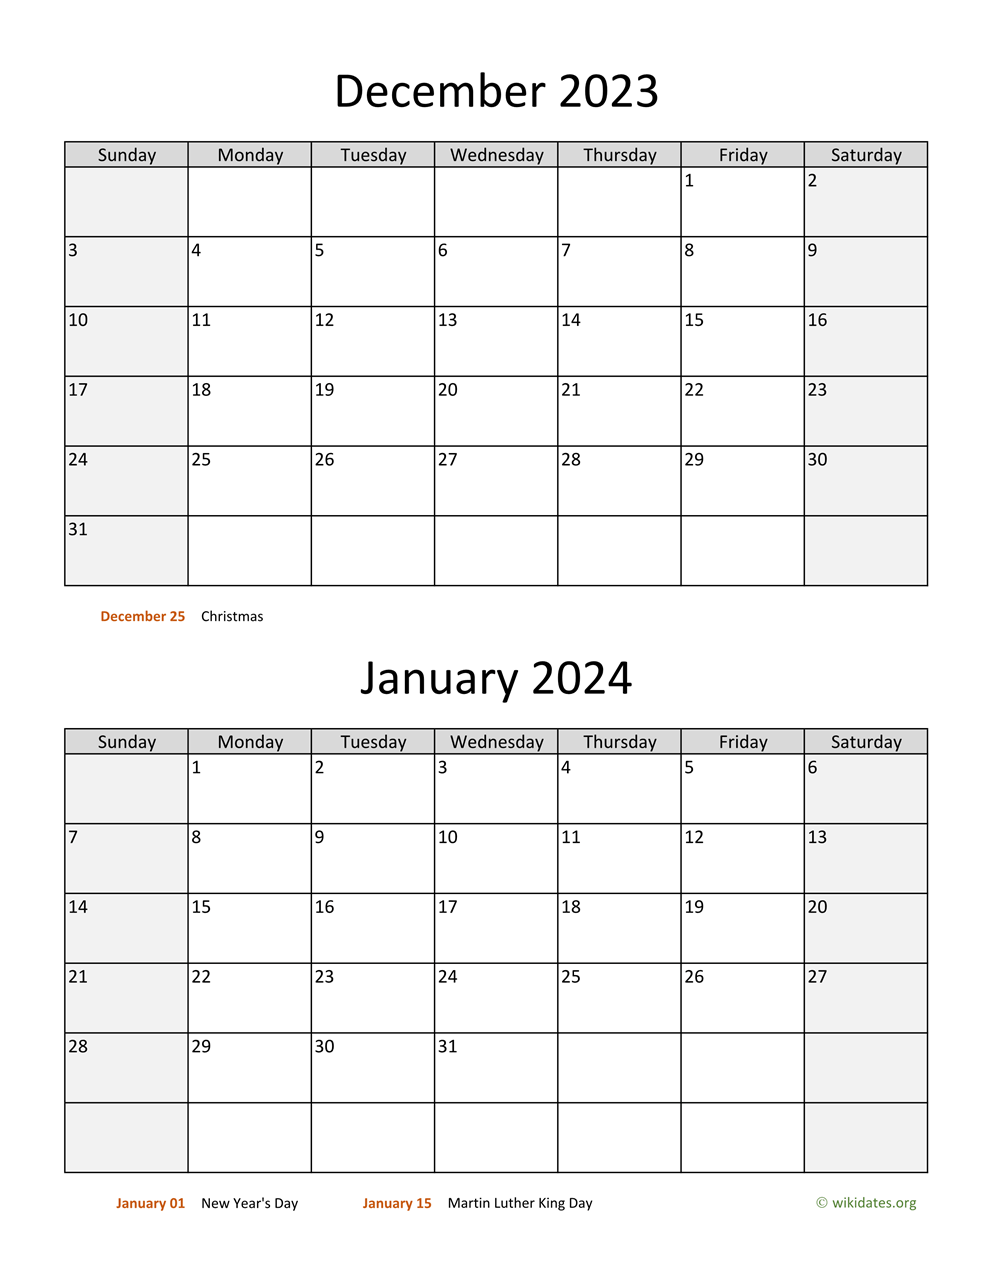 December 2023 And January 2024 Calendar | Wikidates for December 2023 To January 2024 Calendar Printable